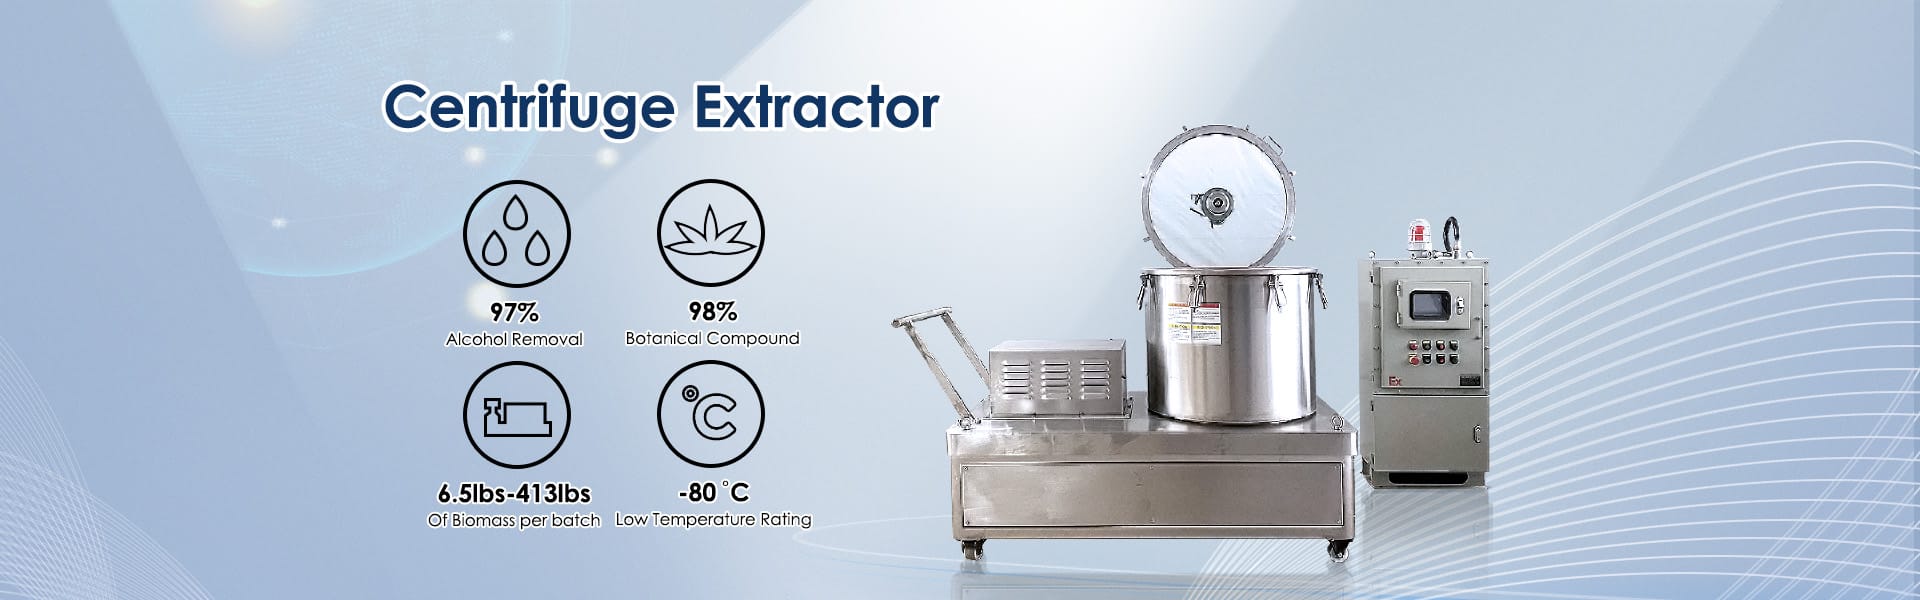 banner of centrifugal extractor